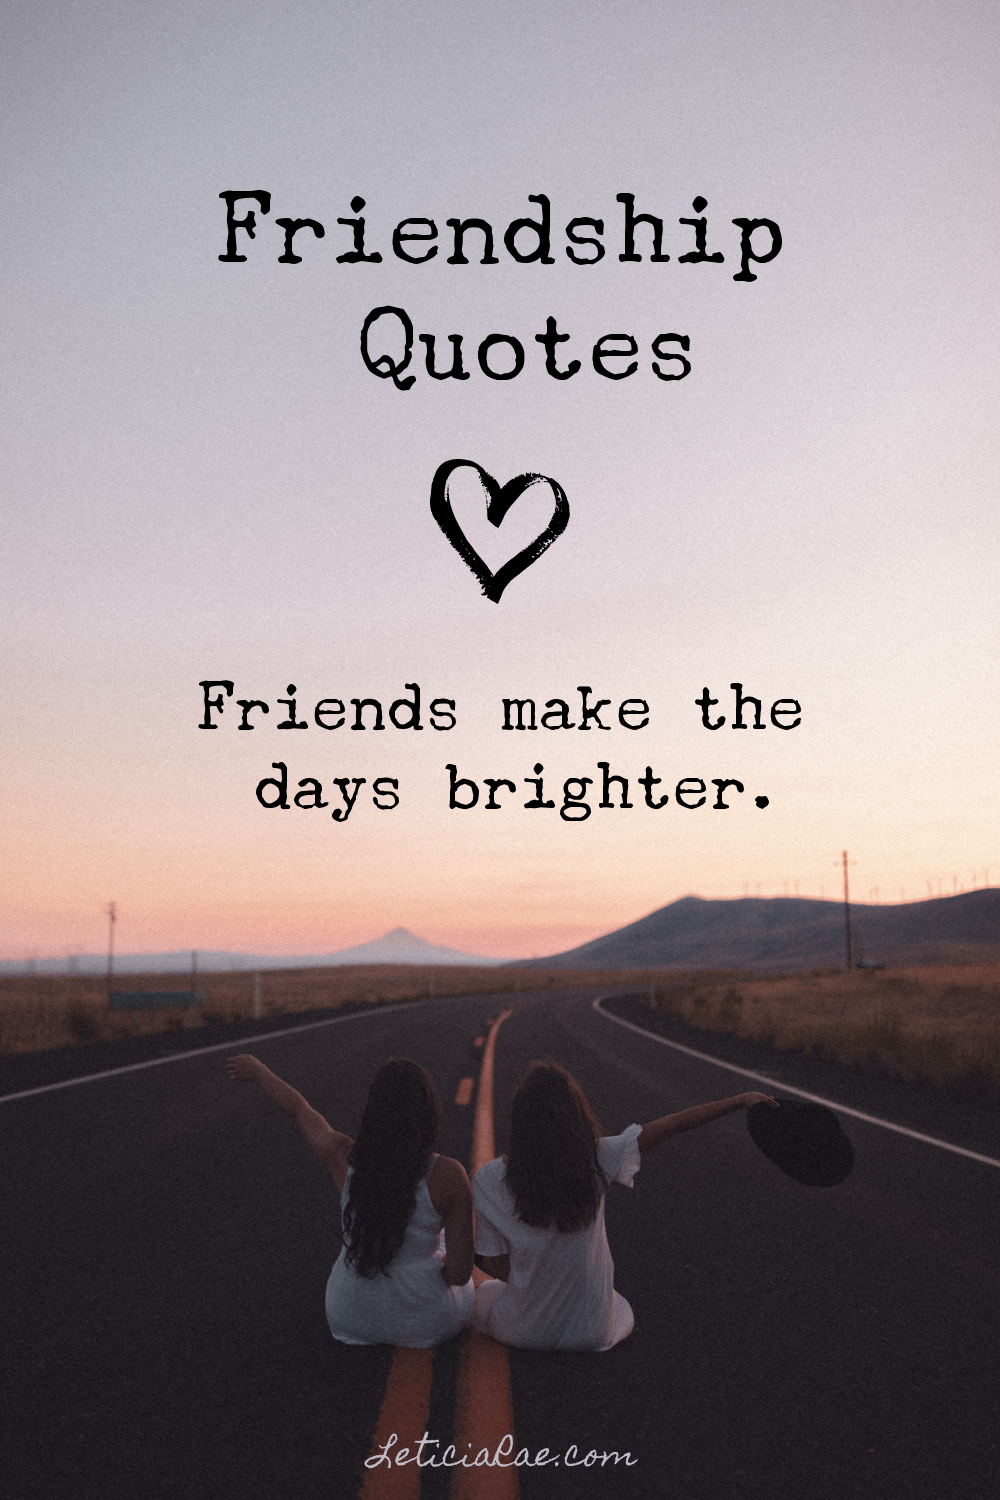 Friendship Quotes — Finding The Silver Lining